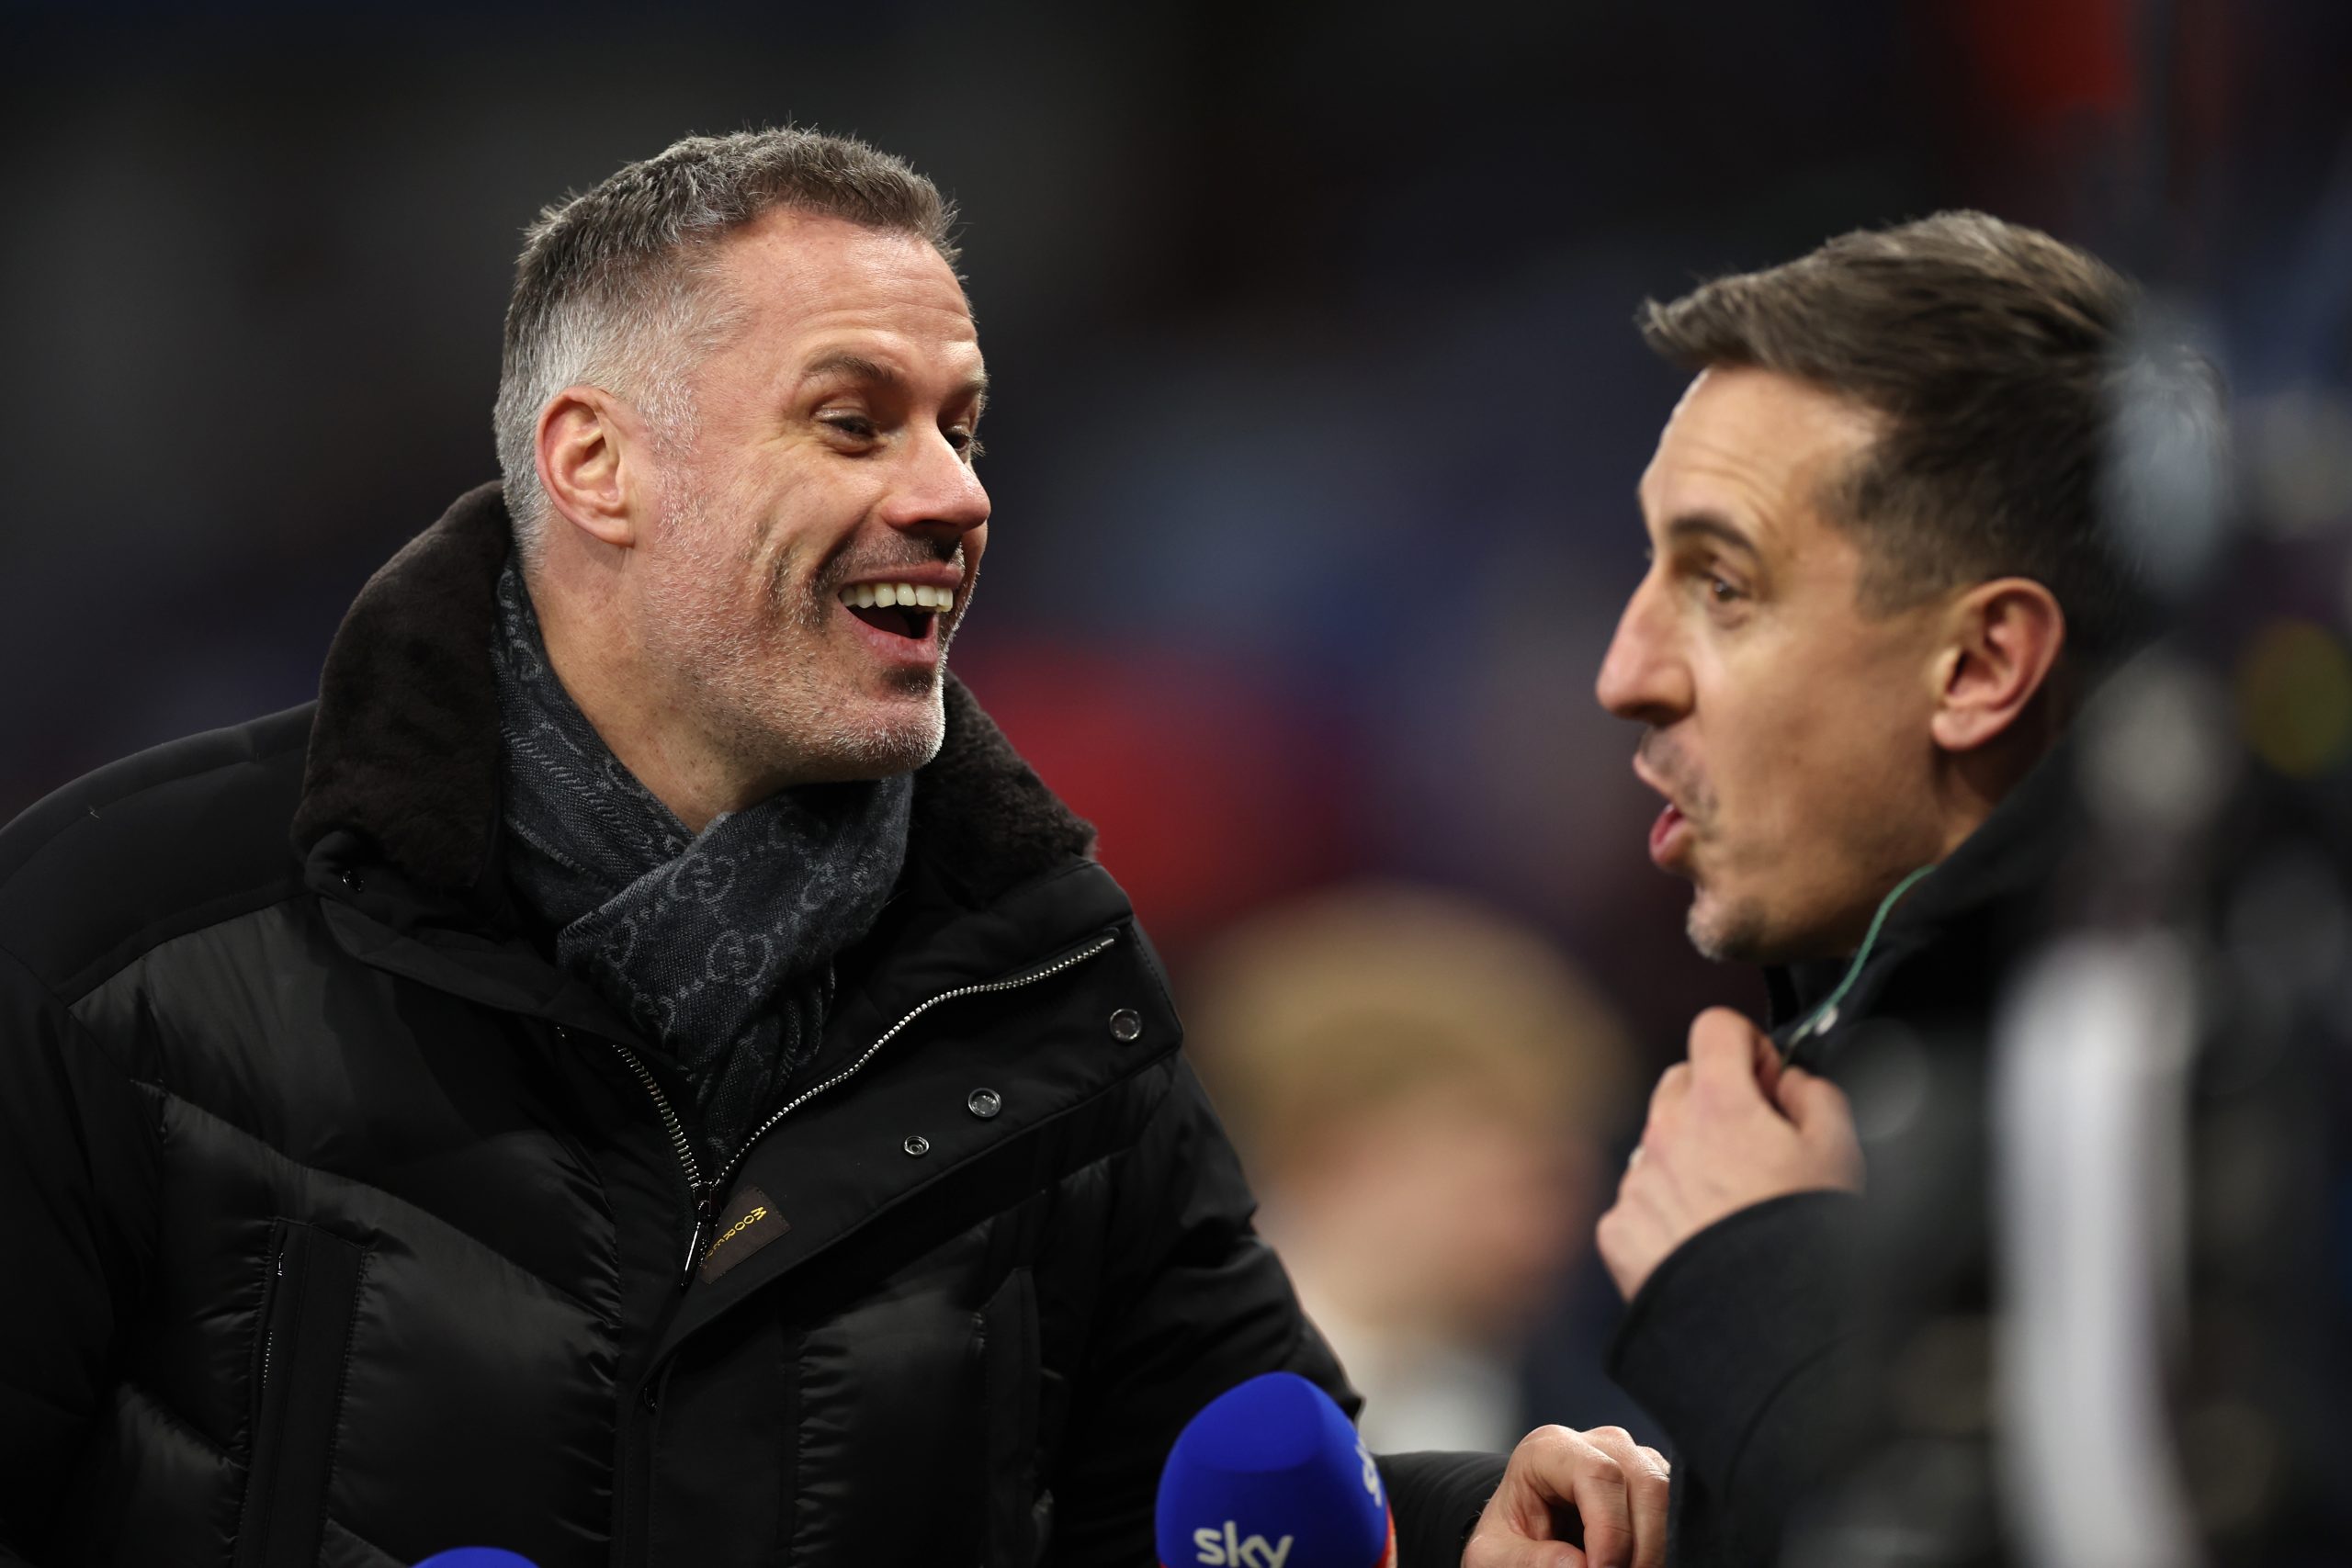 Jamie Carragher takes jibe at former Manchester United skipper, Gary Neville